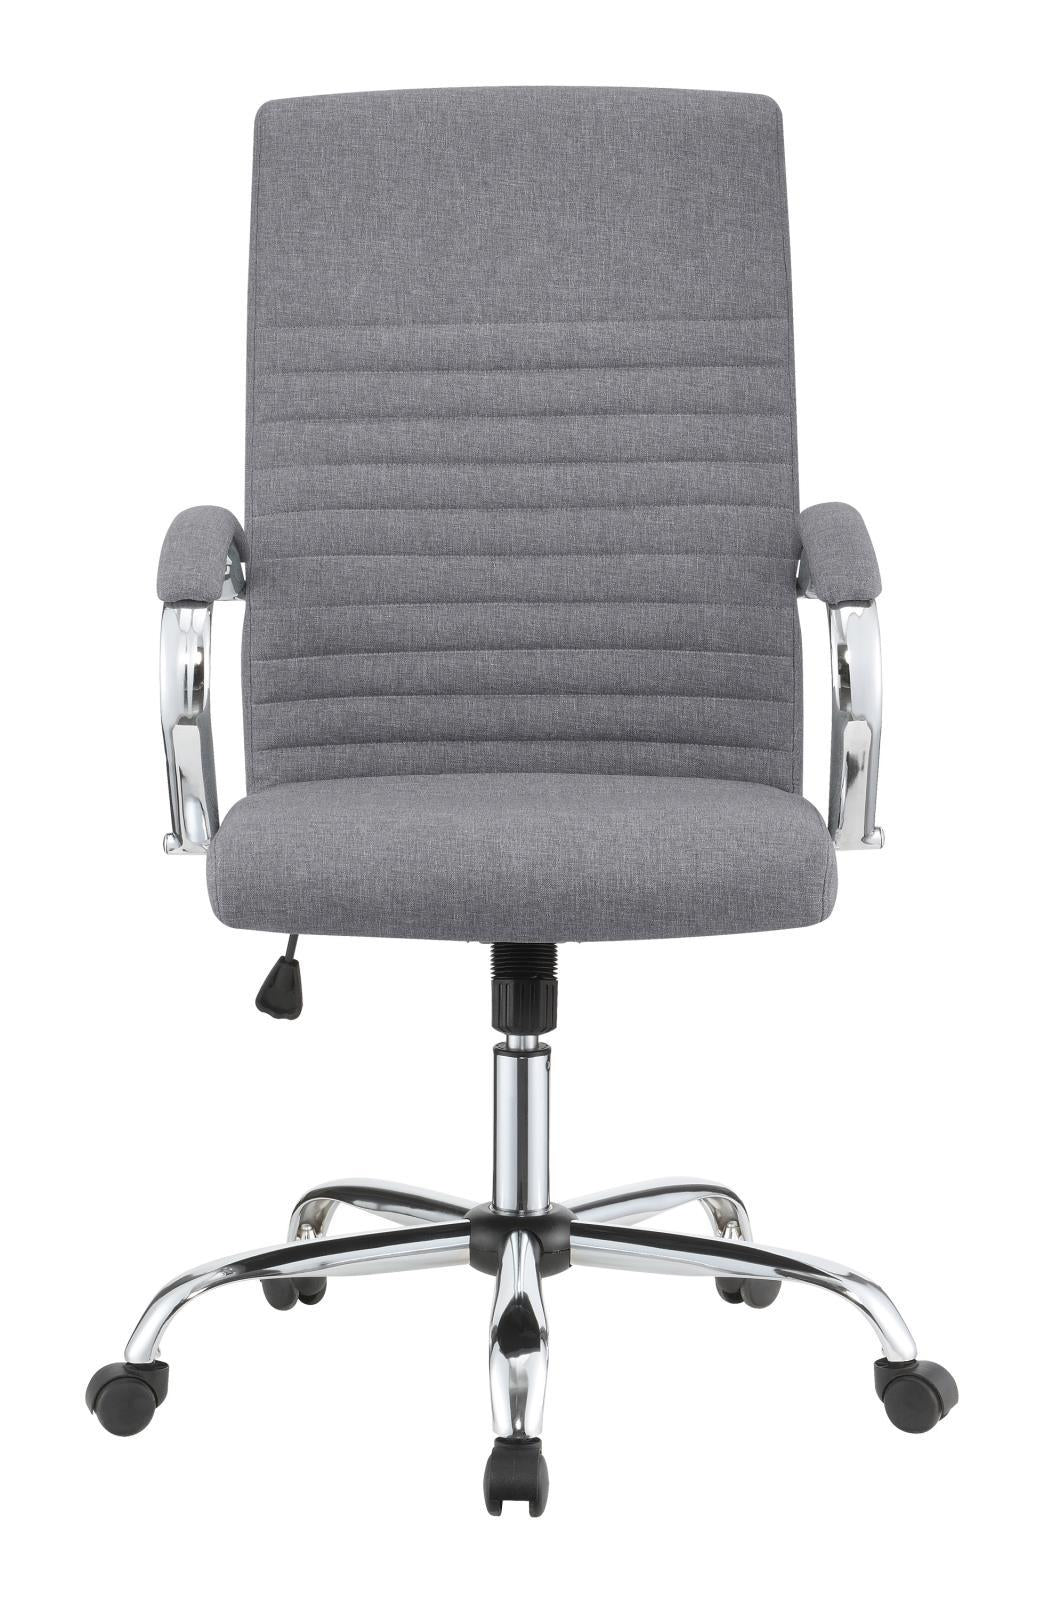 Abisko Upholstered Office Chair with Casters Grey and Chrome - Half Price Furniture